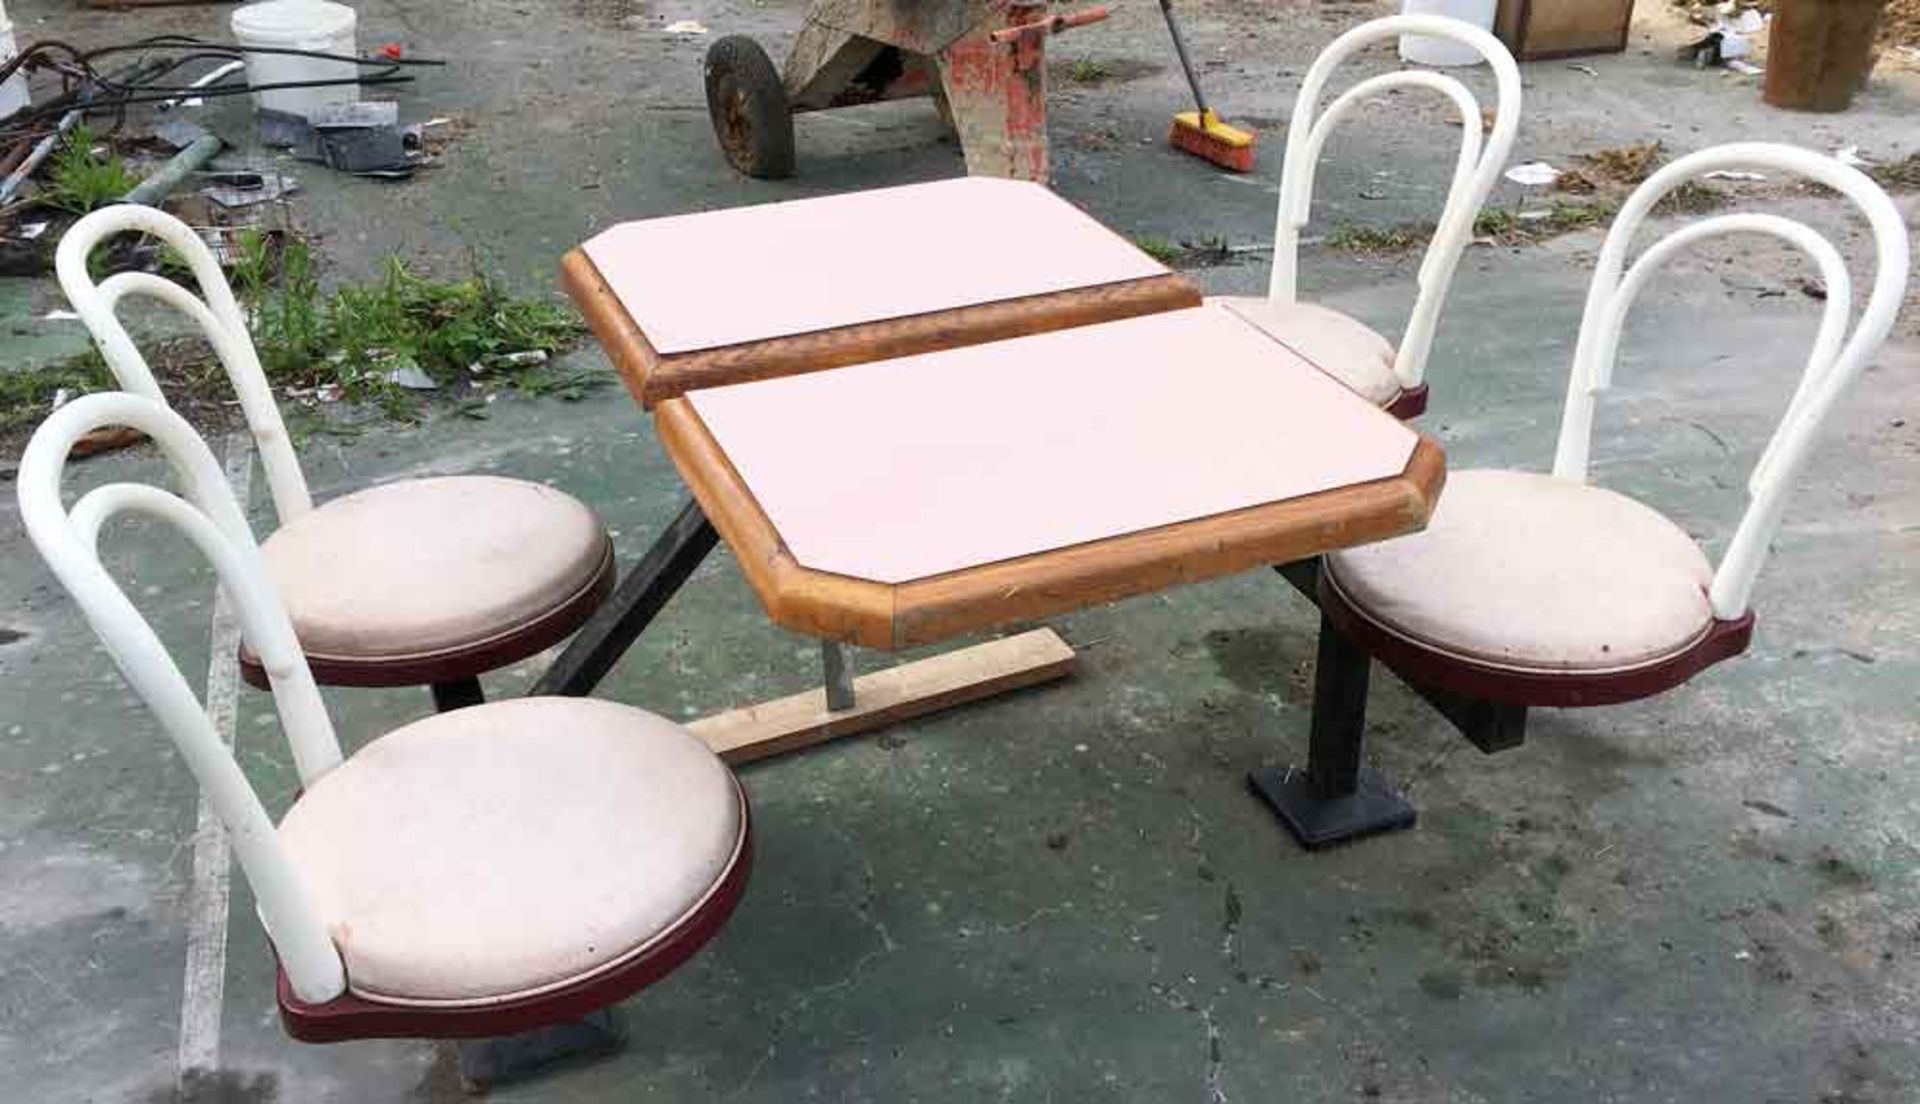 Heavy Duty 4 Seat Bench/Table - Image 2 of 2